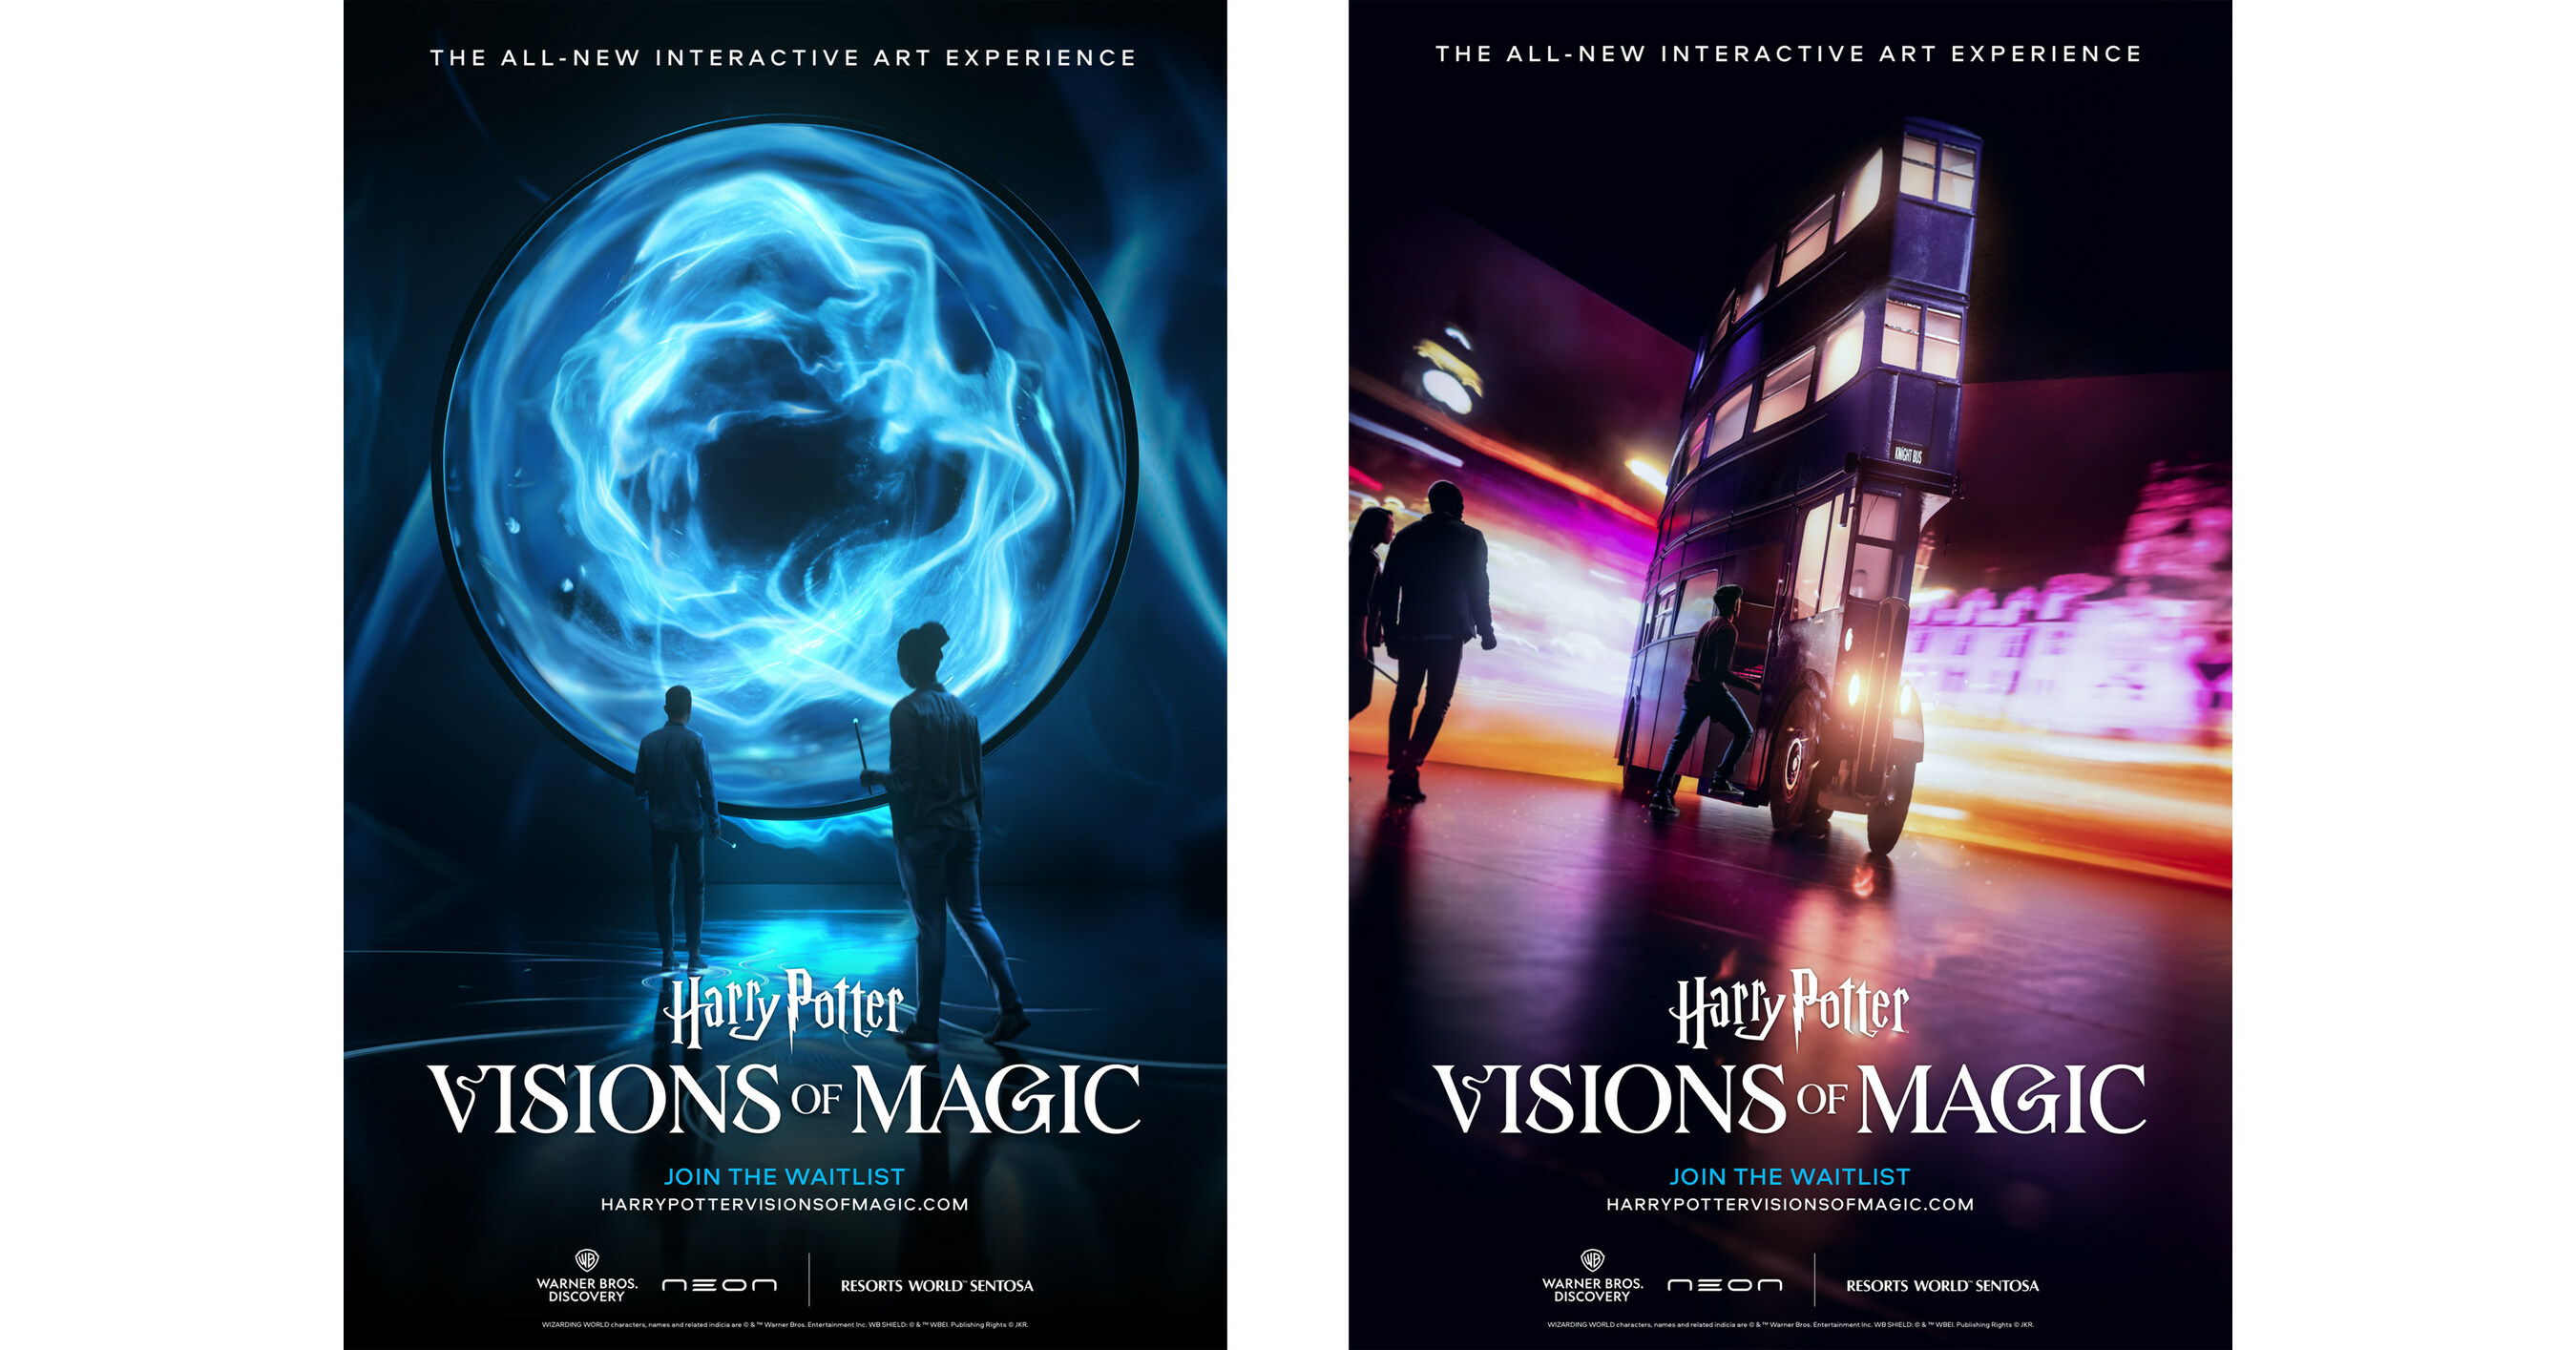 HARRY POTTER: VISIONS OF MAGIC TO HOST ITS ASIA PREMIERE IN SINGAPORE AT RESORTS WORLD SENTOSA


USA – English





APAC – English